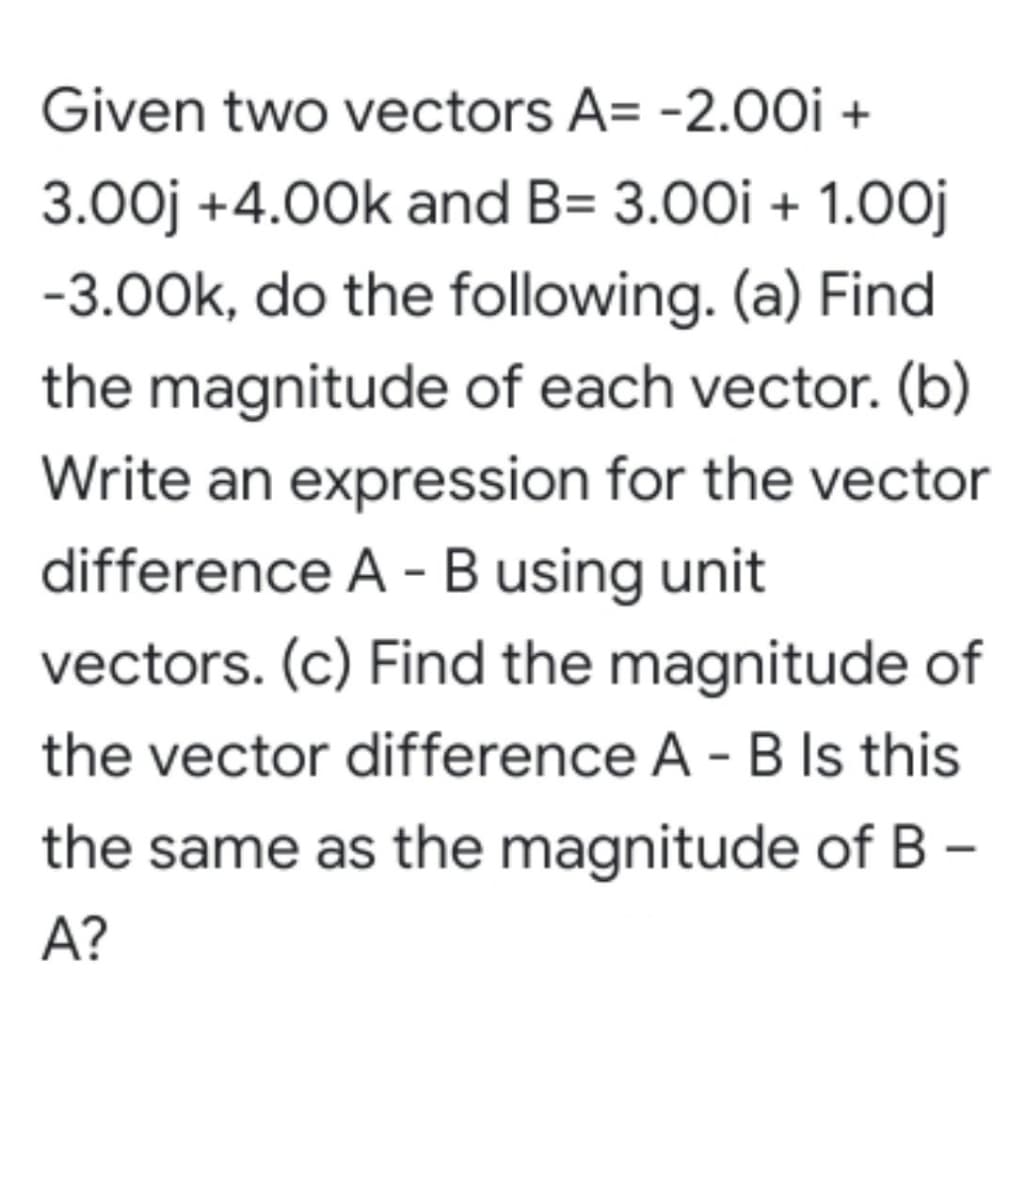 Given two vectors A= -2.0Oi +
3.00j +4.00k and B= 3.00i + 1.0oj
-3.00k, do the following. (a) Find
the magnitude of each vector. (b)
Write an expression for the vector
difference A - B using unit
vectors. (c) Find the magnitude of
the vector difference A - B Is this
the same as the magnitude of B –
A?
